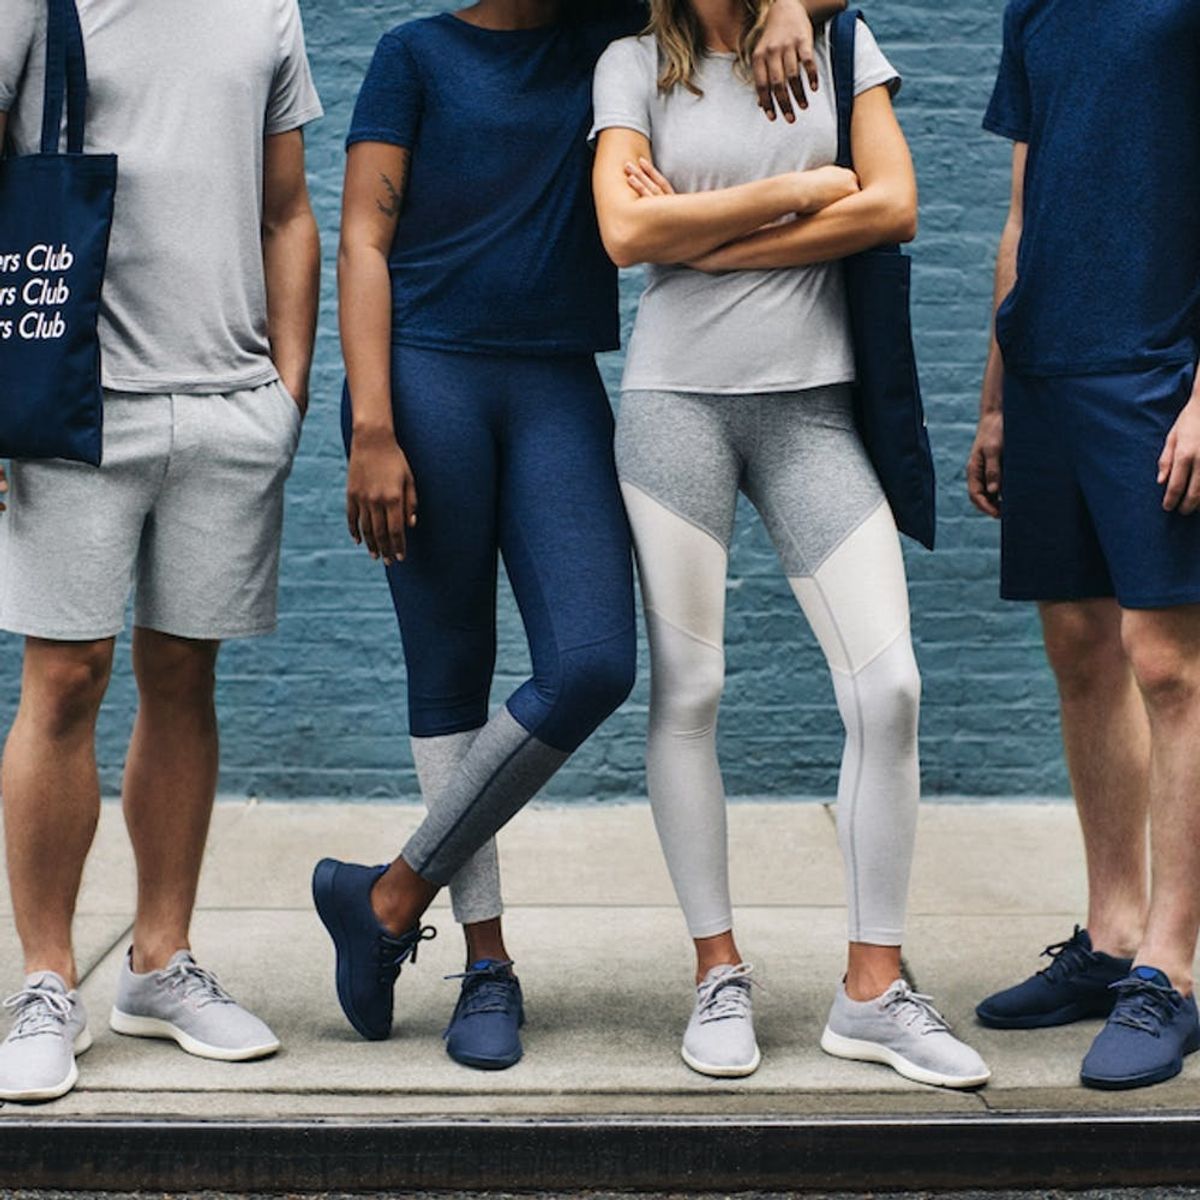 Outdoor Voices and Allbirds Just Collaborated on the Activewear of Our Dreams